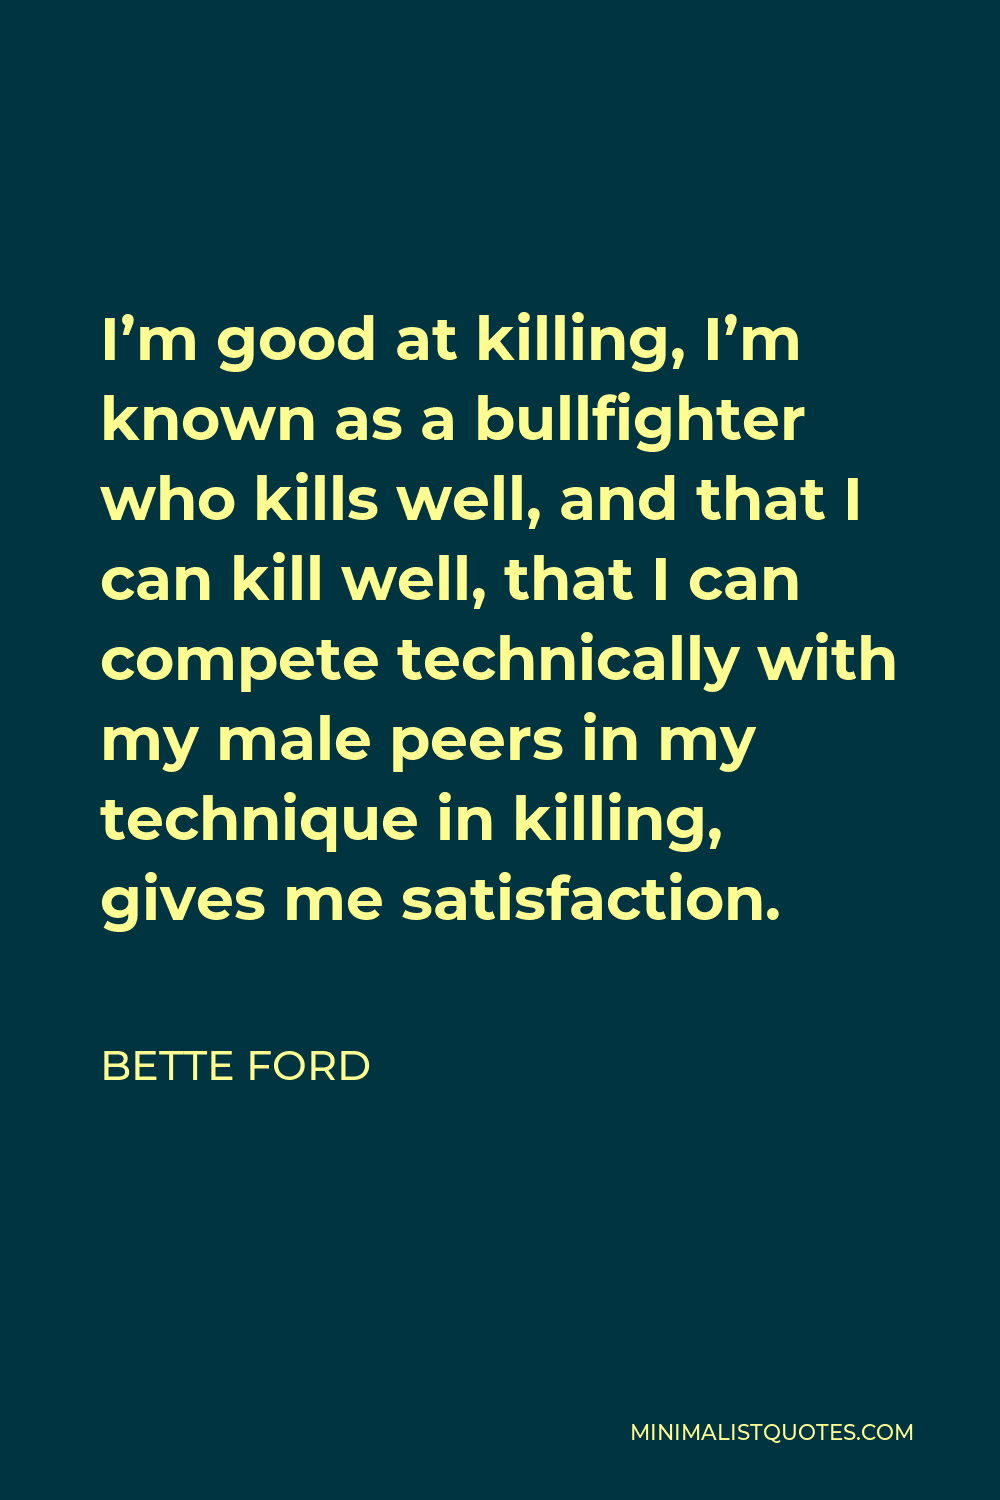 Bette Ford Quote - I’m good at killing, I’m known as a bullfighter who kills well, and that I can kill well, that I can compete technically with my male peers in my technique in killing, gives me satisfaction.